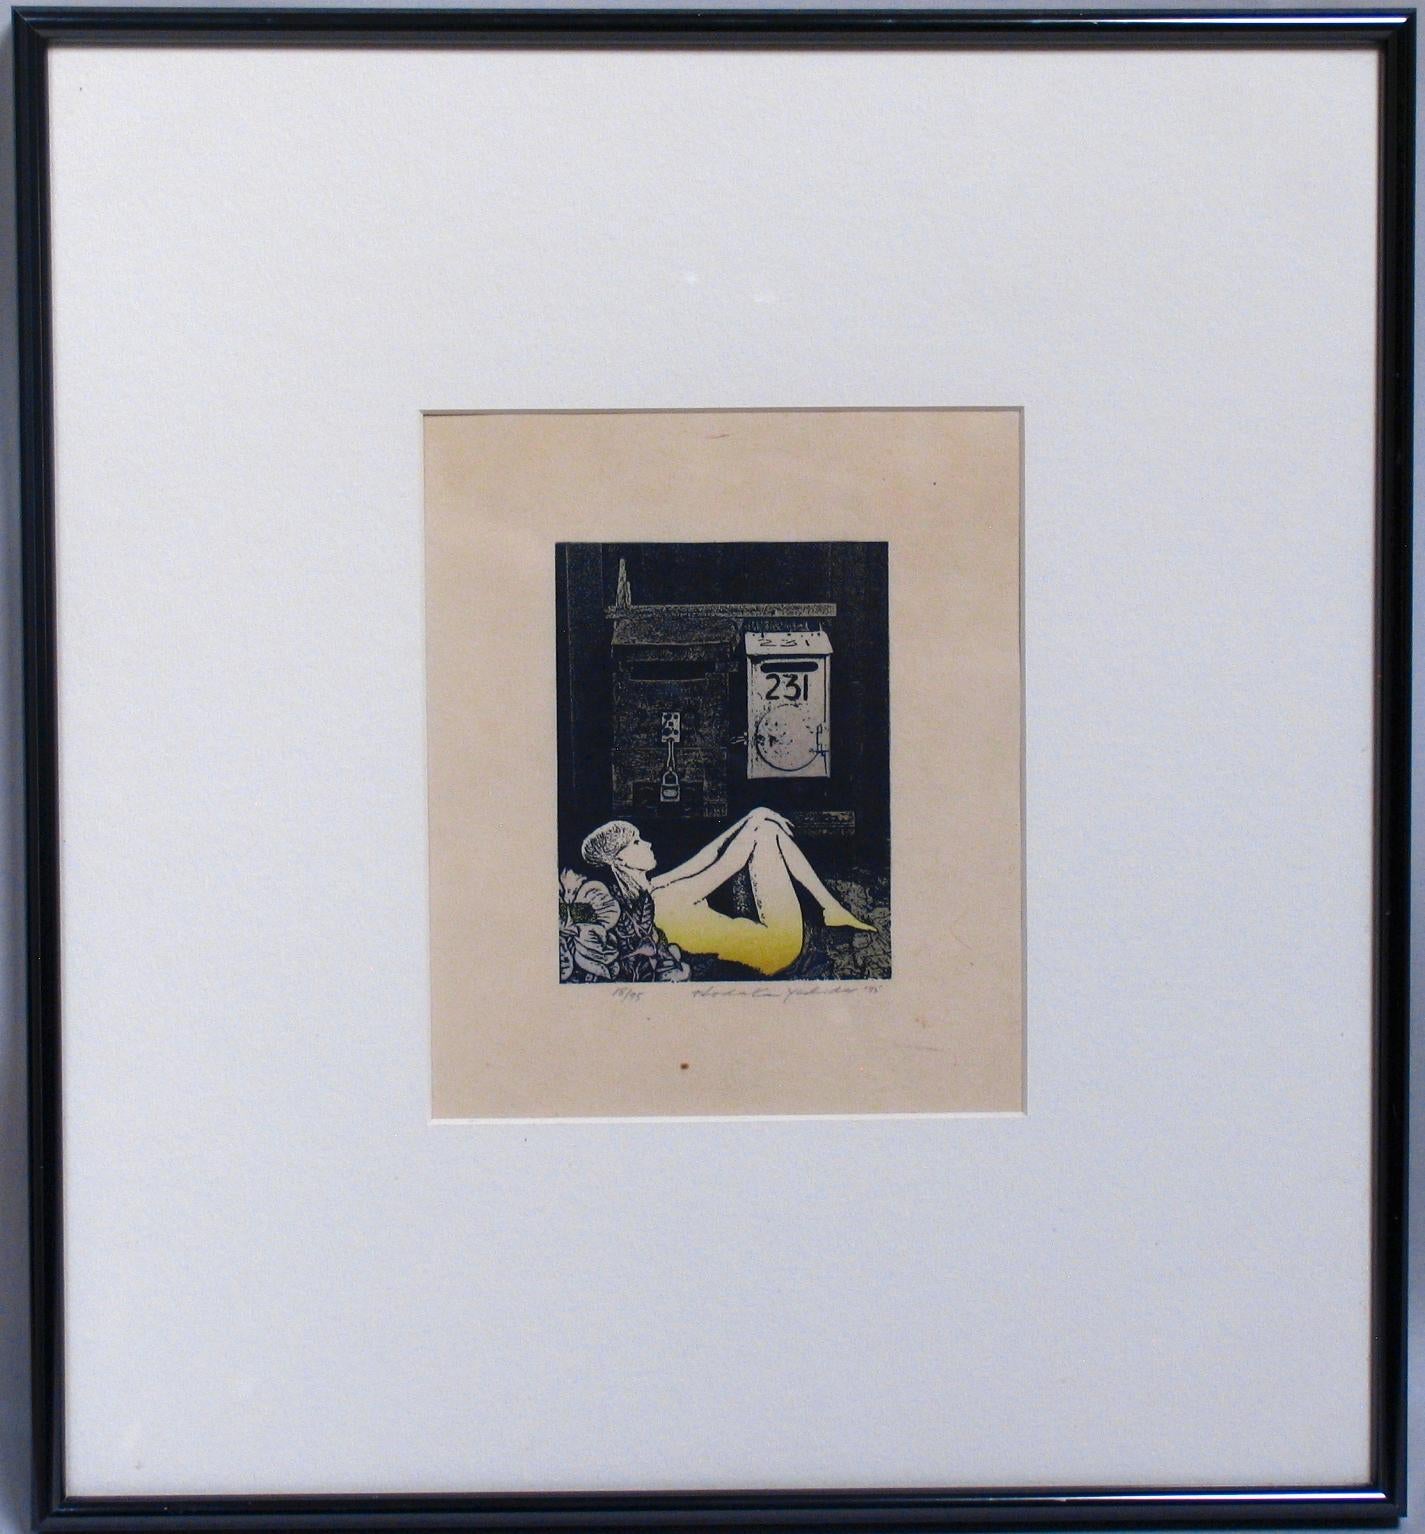 Japanese lithograph by Hodaka Yoshida (1926-1995), dated 1975 and numbered 18/75 of a young nude woman reclining on some flowers with a mail box behind. From the series of House & Nudes, transition B created in the years between 1974-1979. Measuring